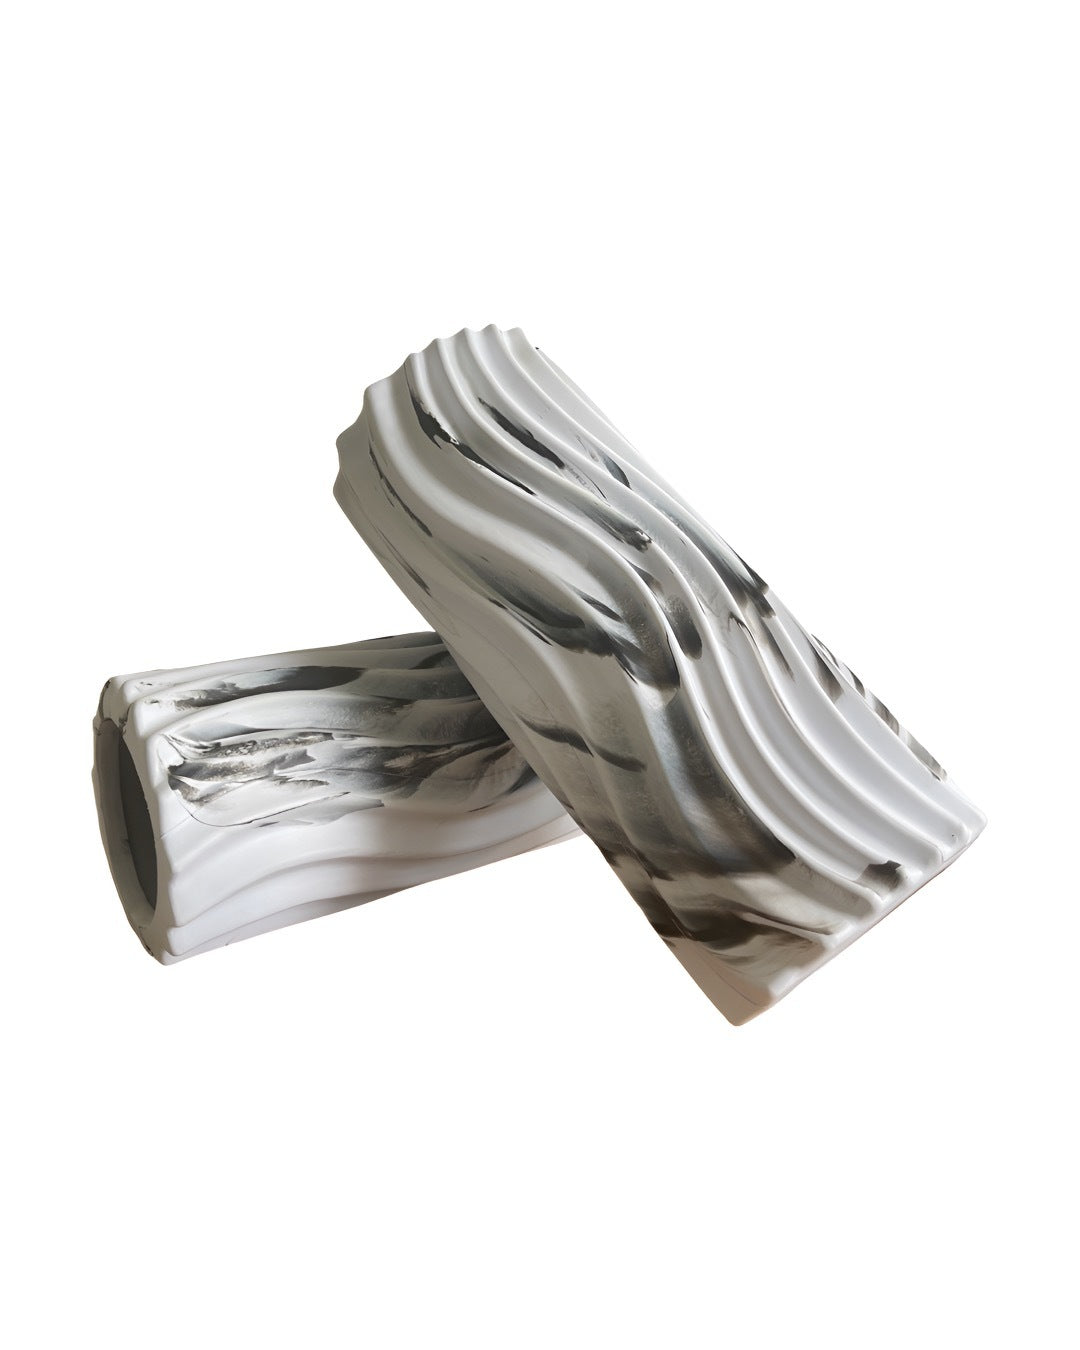 Release and stretch foam roller black and white marble